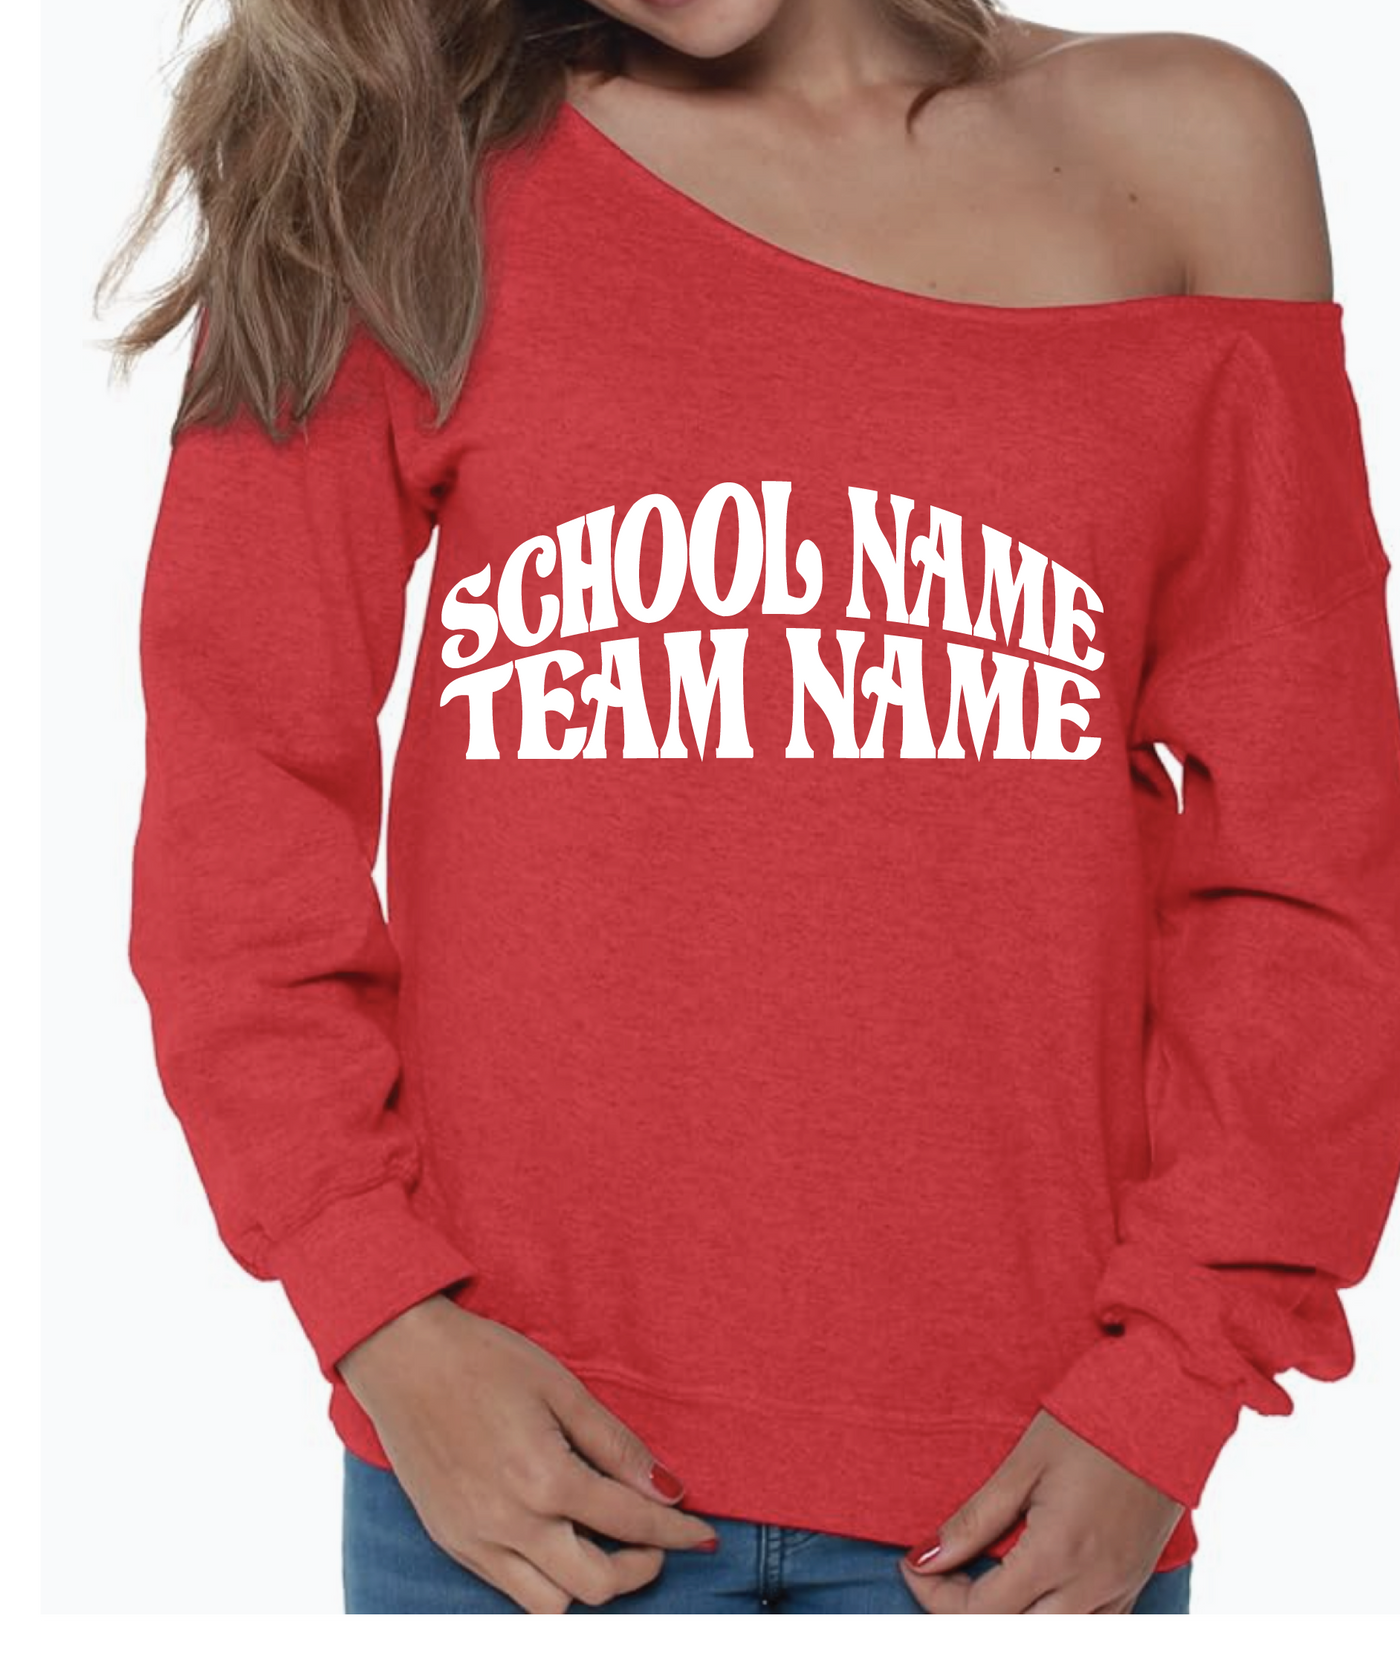 Customize Your Own Off the Shoulder College Game Day Crewneck